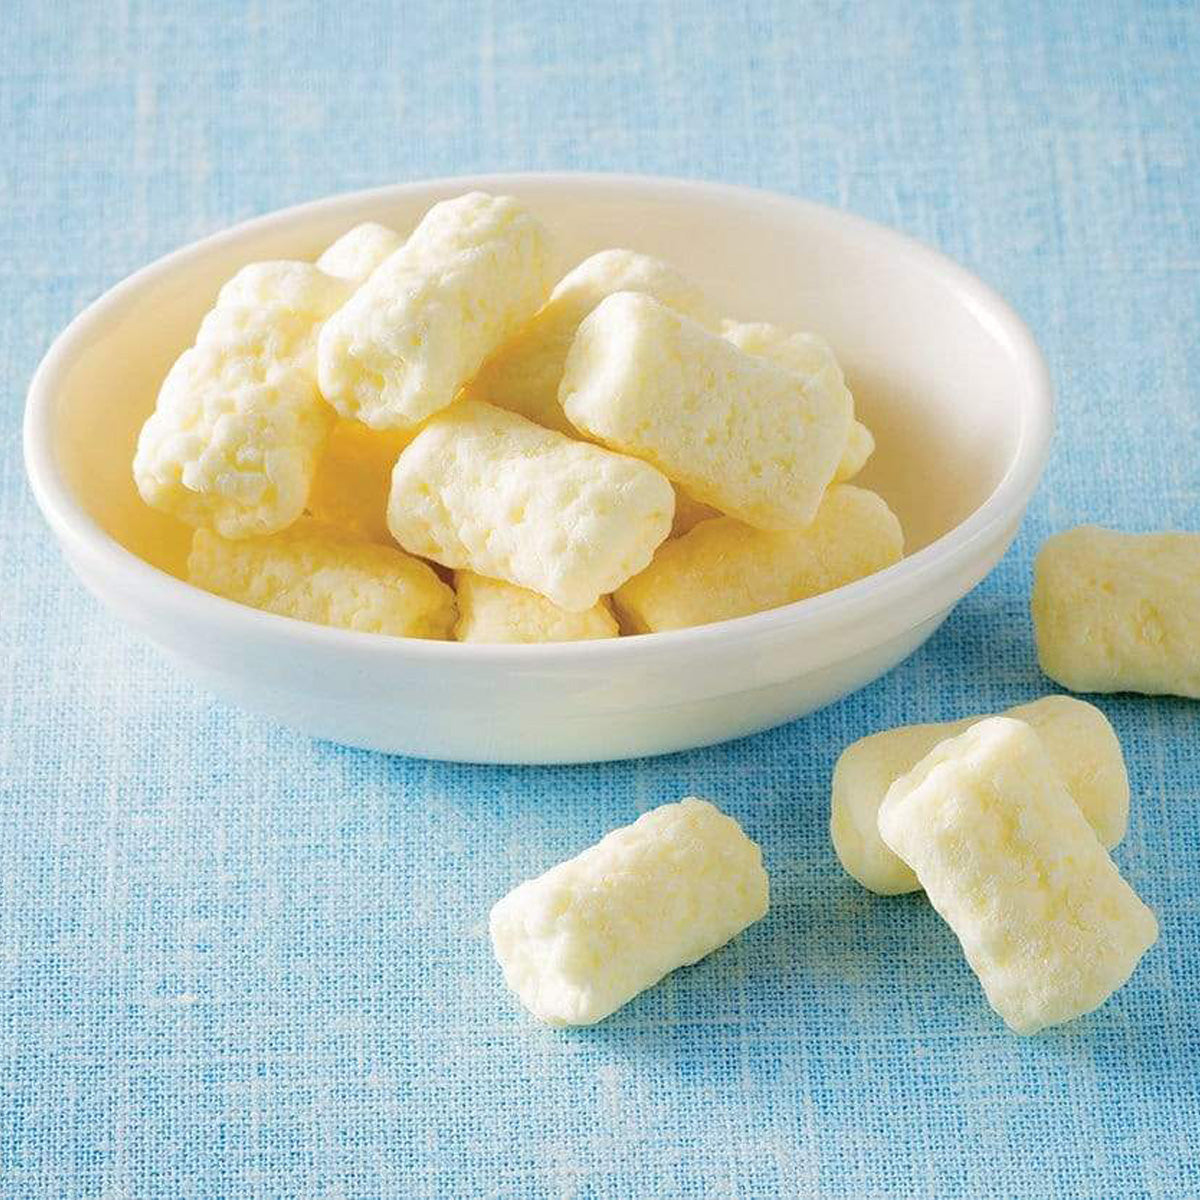 ROYCE' Chocolate - Marshmallow Chocolate "White" - Image shows white chocolate-coated marshmallows in a white bowl. Background is a blue cloth surface with accents of more white chocolate-coated marshmallows.